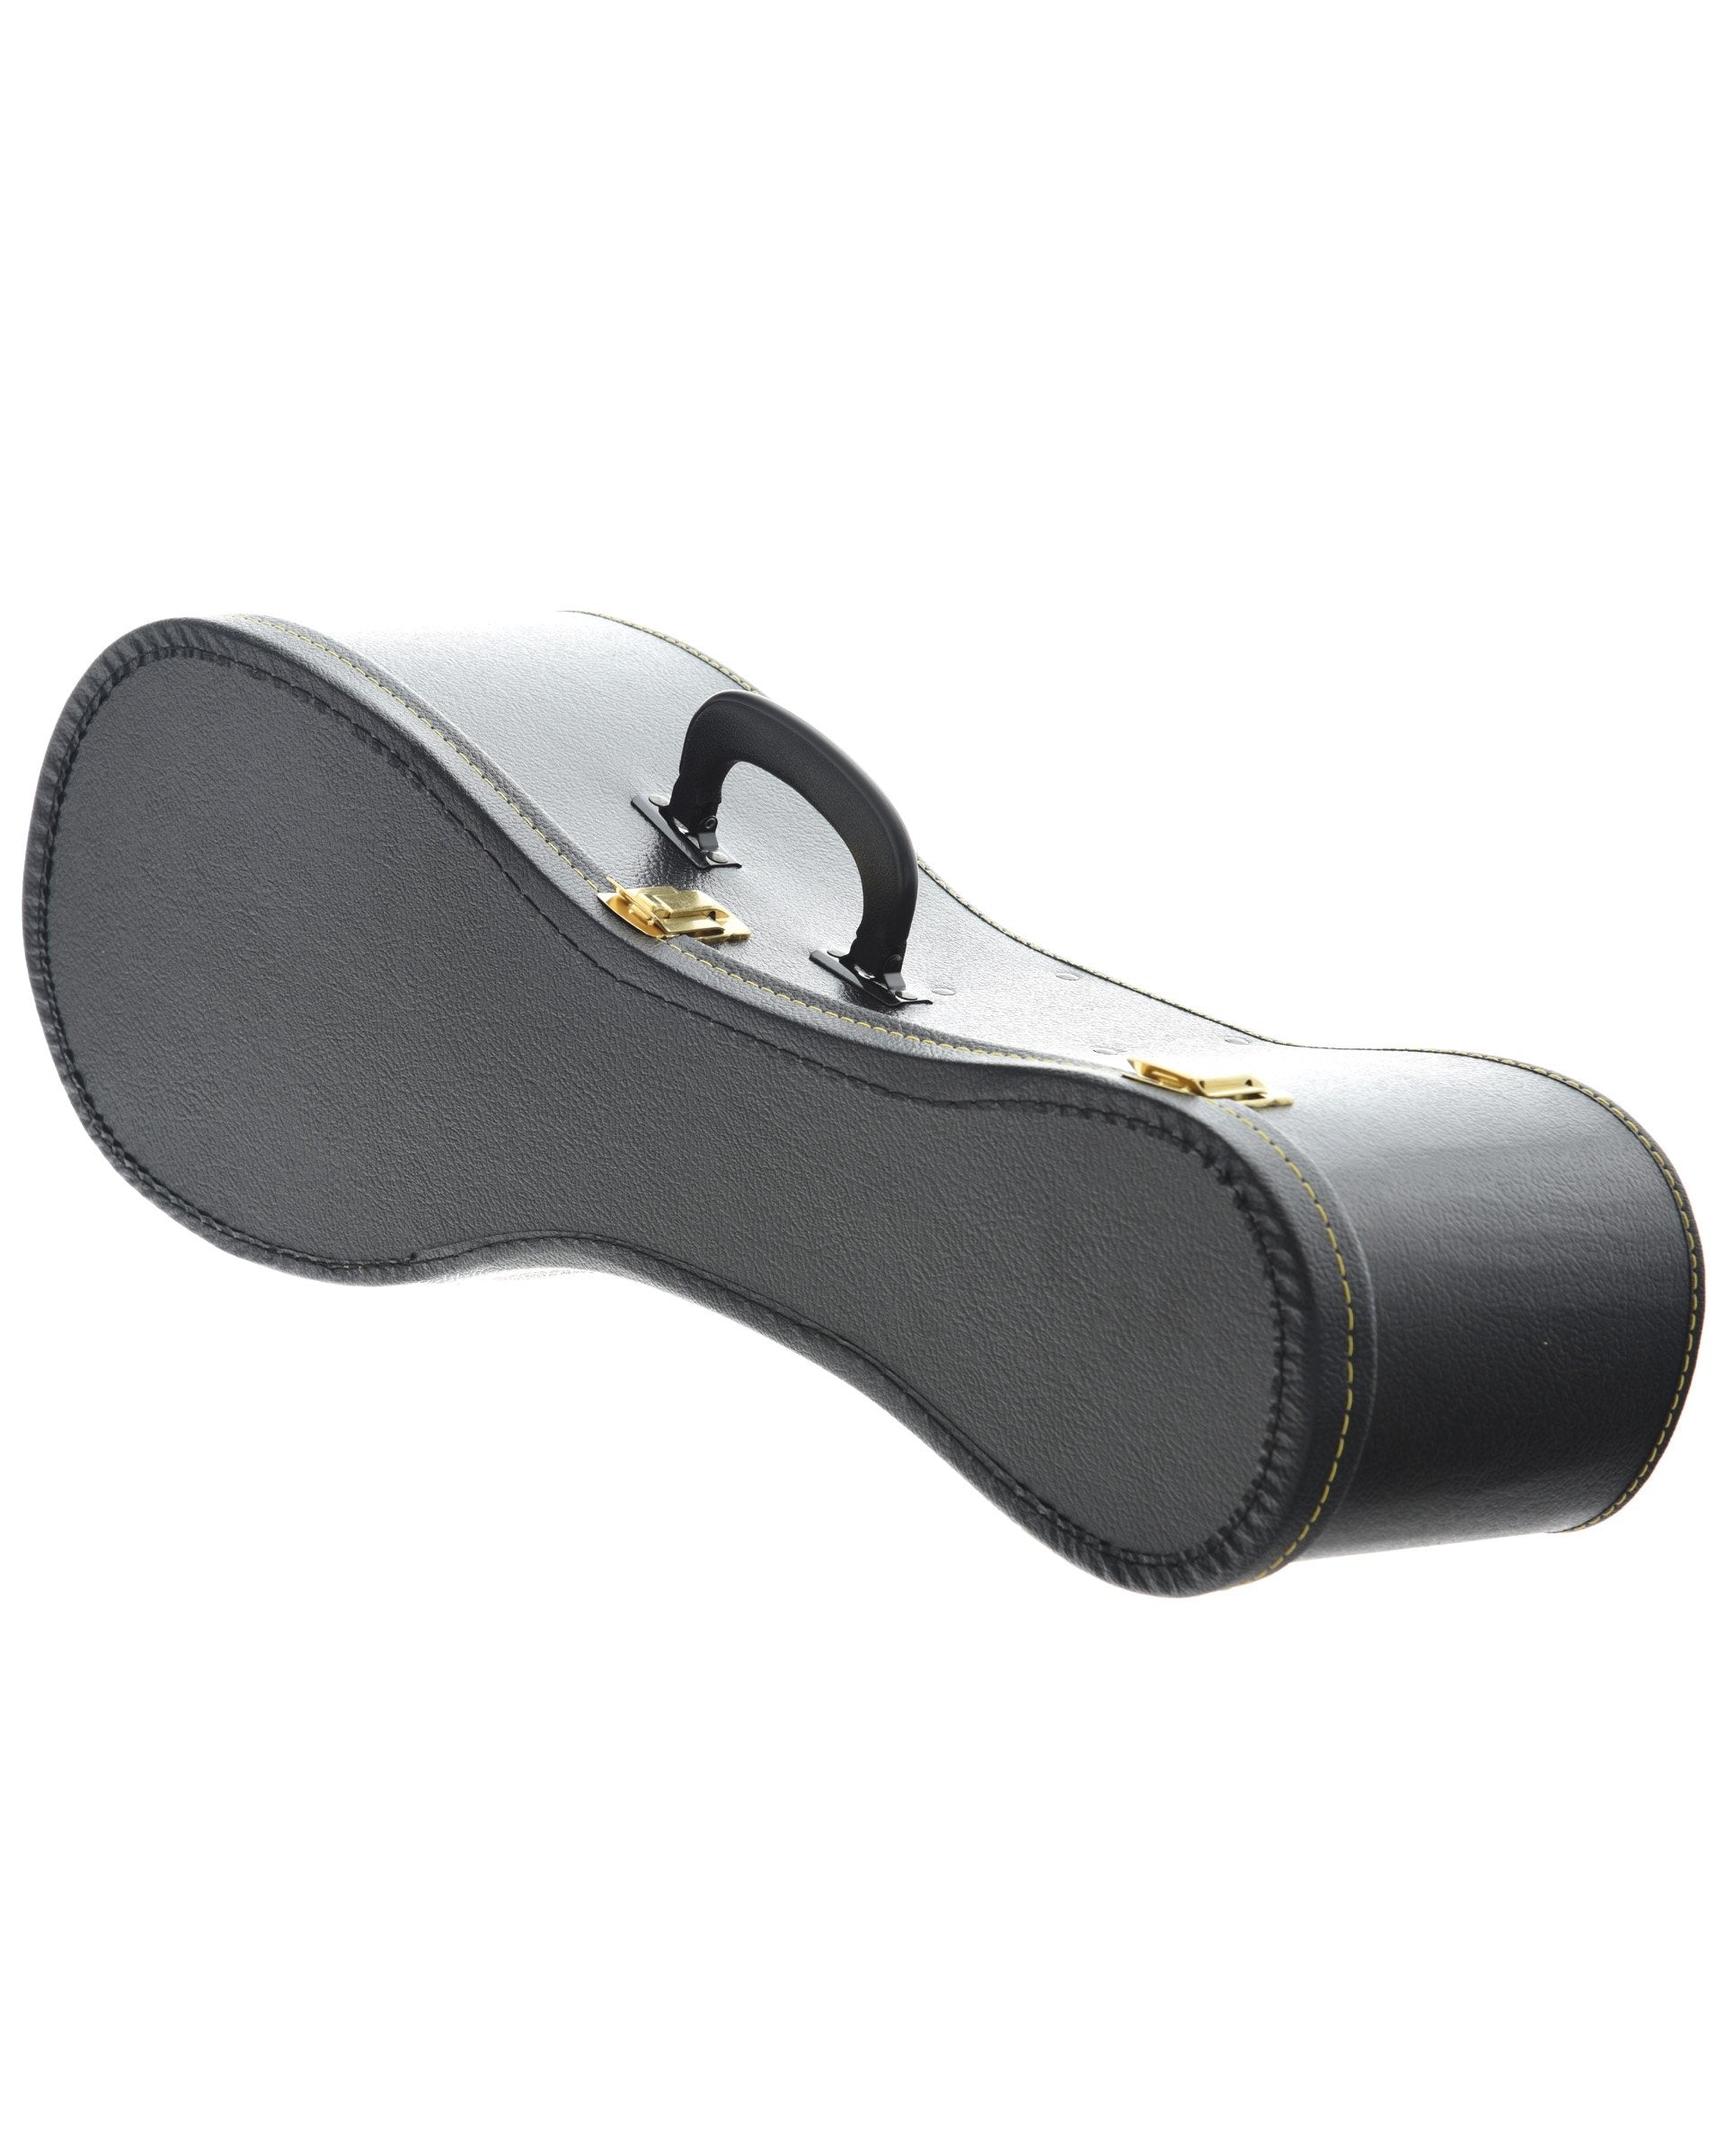 Image 1 of Bowlback Mandolin Chipboard Case - SKU# MCCB-RB : Product Type Accessories & Parts : Elderly Instruments